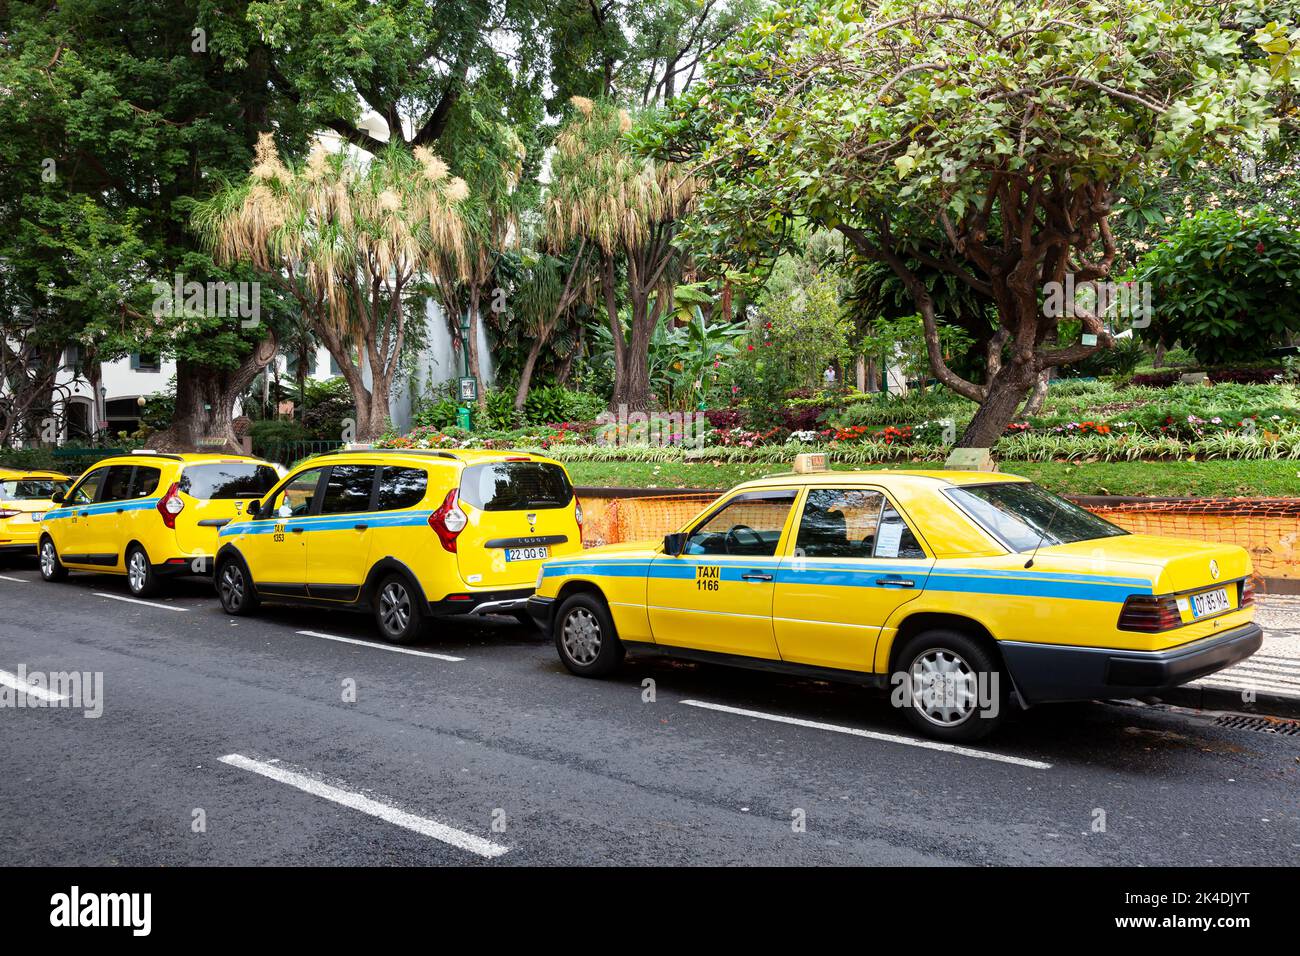 Waiting taxis in the Av. Arriaga in the historic town centre of Funchal,  Santa Luzia, Funchal, Madeira, Portugal ,Europe Stock Photo